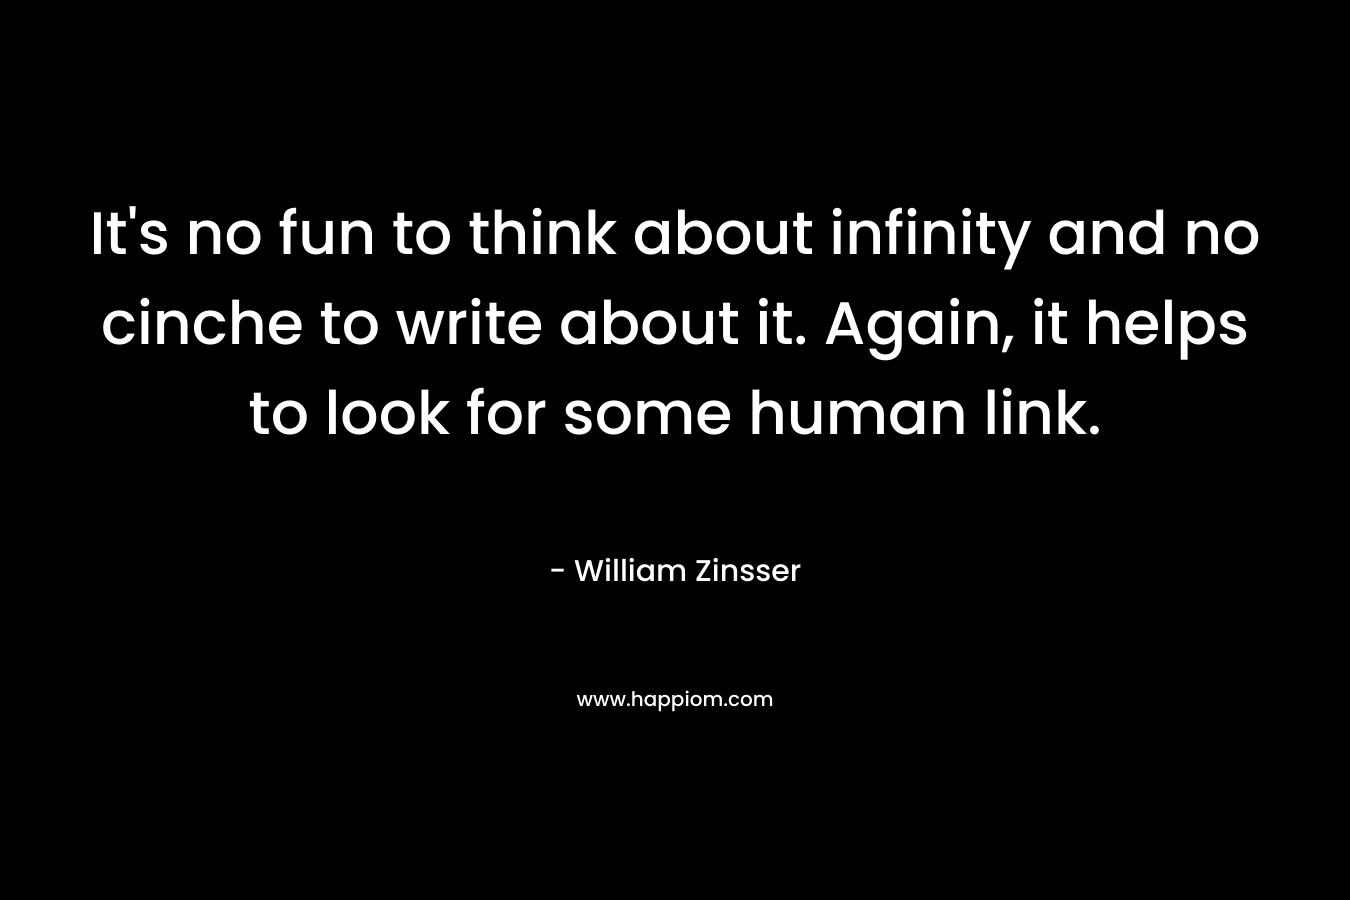 It’s no fun to think about infinity and no cinche to write about it. Again, it helps to look for some human link. – William Zinsser